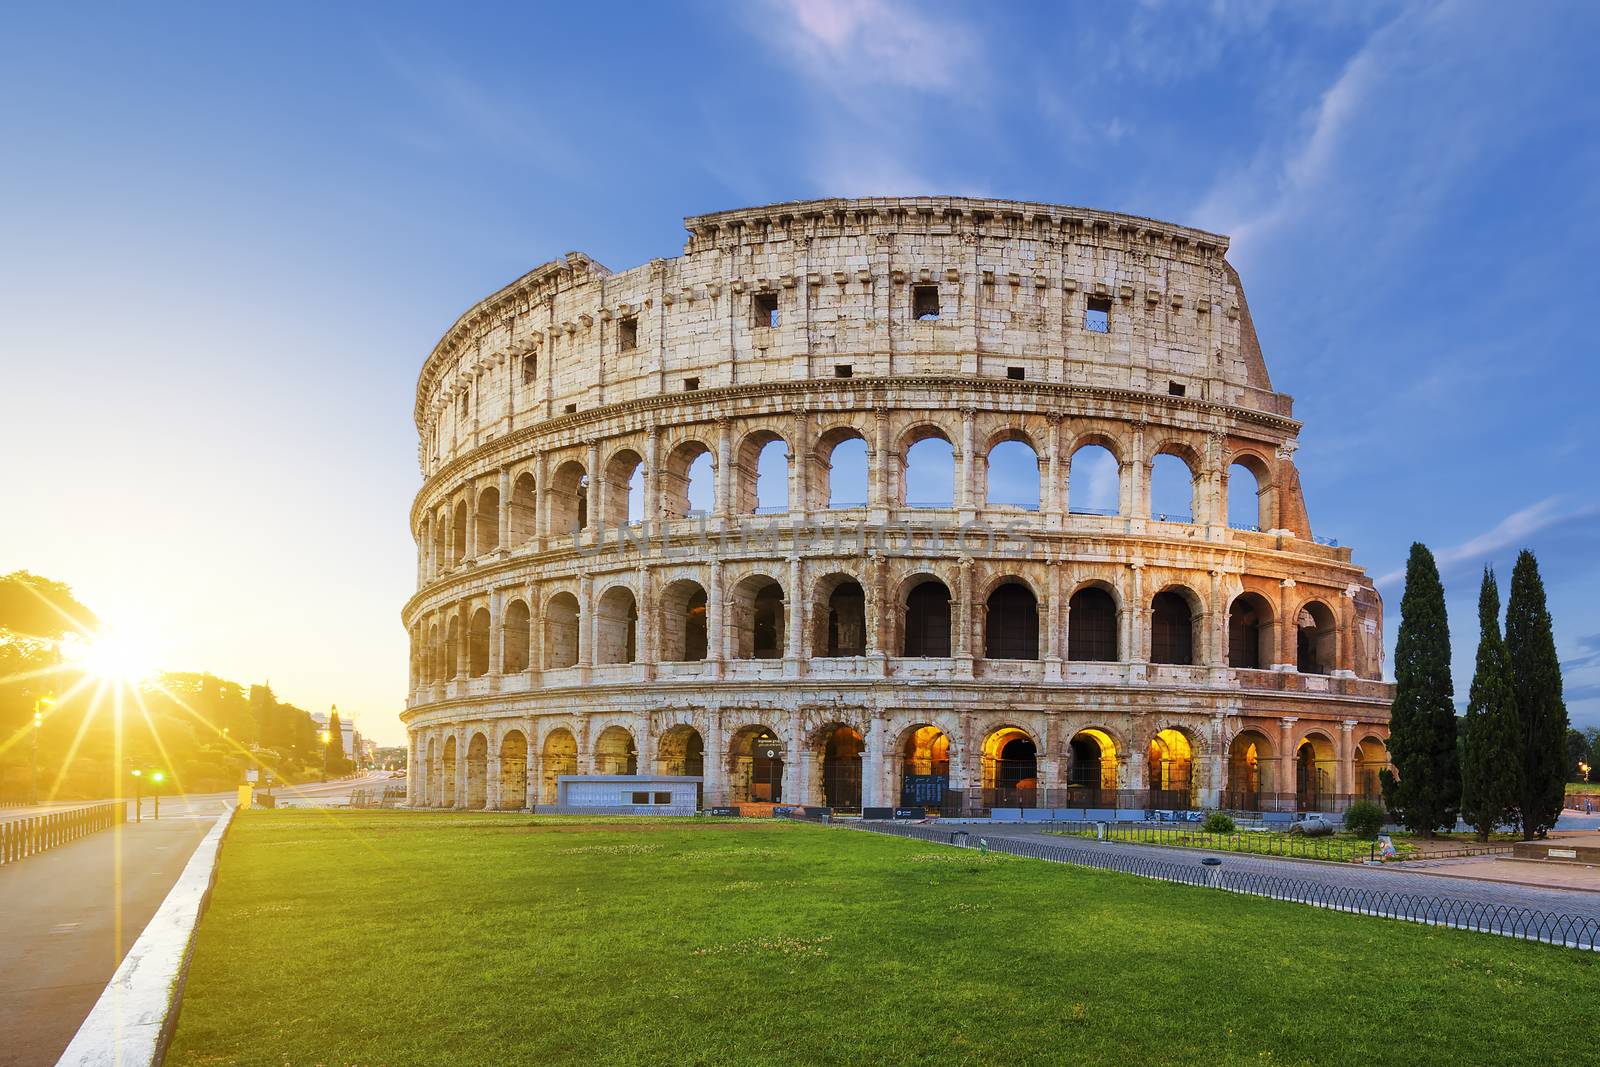 View of Colosseum in Rome at sunrise, Italy, Europe.